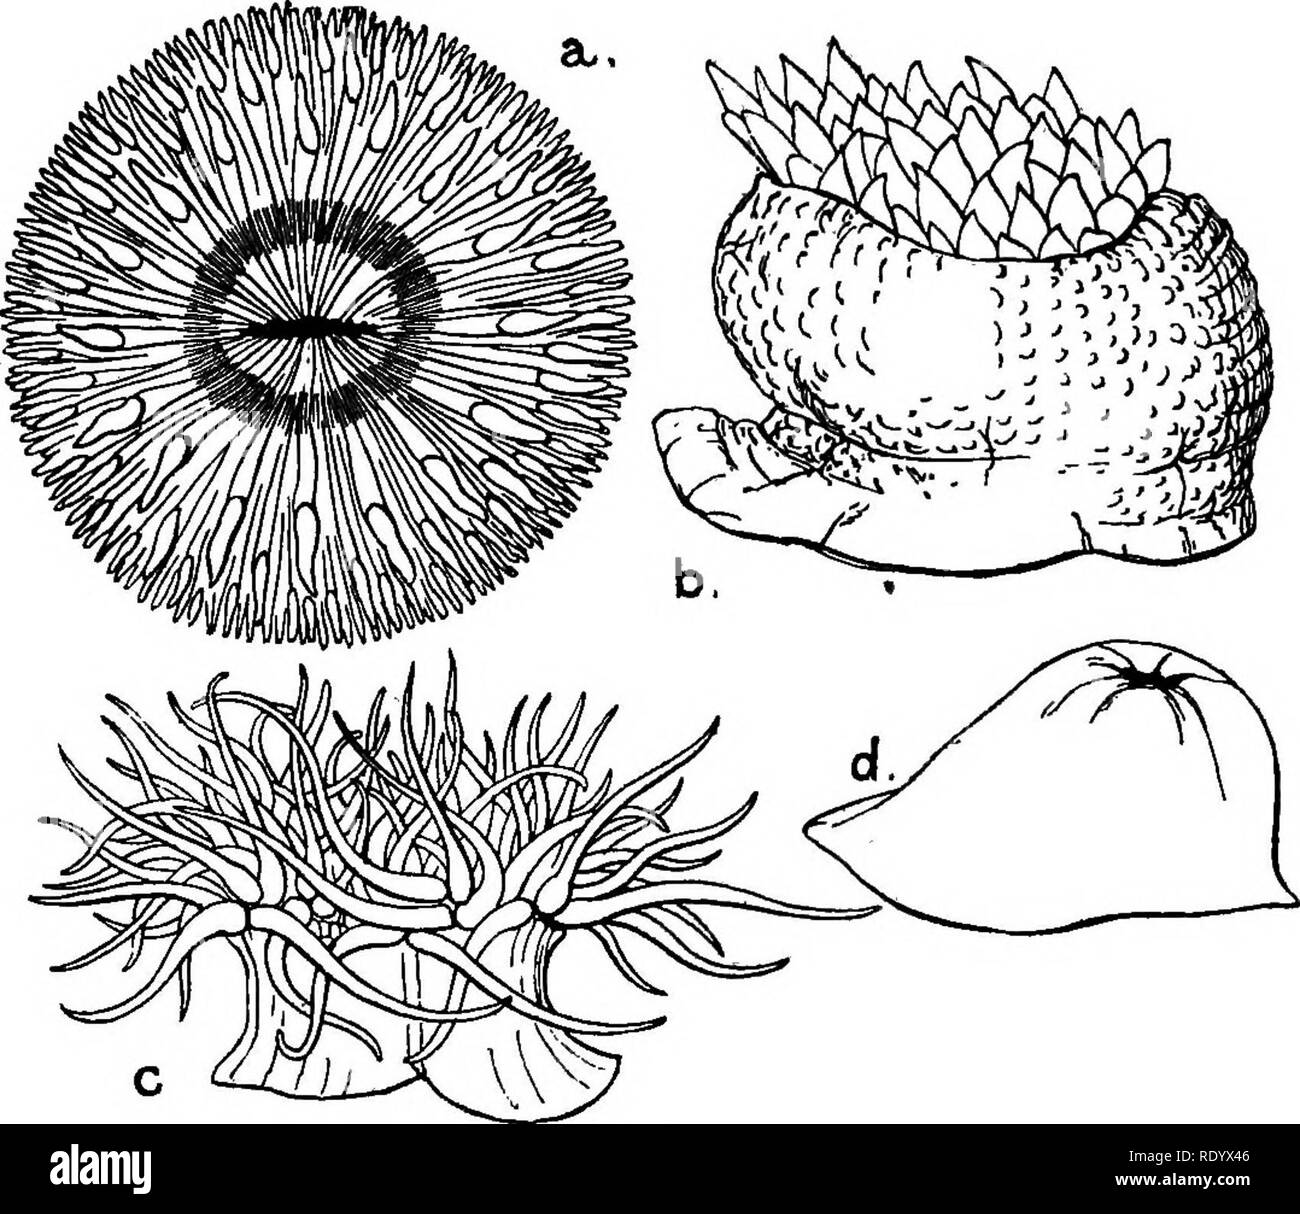 . Diversions of a naturalist . Natural history. SEA-WORMS AND SEA-ANEMONES 85. Fig. 6.---British Sea-Anemones. a, Sagartia bellis, the daisy anemone, viewed from above when fully expanded. b, Bunodes crassicornis, half expanded ; side view. c, Anthea cereus. The tentacles are pale apple-green in colour, tipped with mauve, and cannot be completely retracted. d, Actinia mesembryanthemum. The disk of tentacles is completely retracted. This is the commonest sea-anemone on our South Coast, and is usually maroon colour, but often is spotted like a strawberry.. Please note that these images are extra Stock Photo